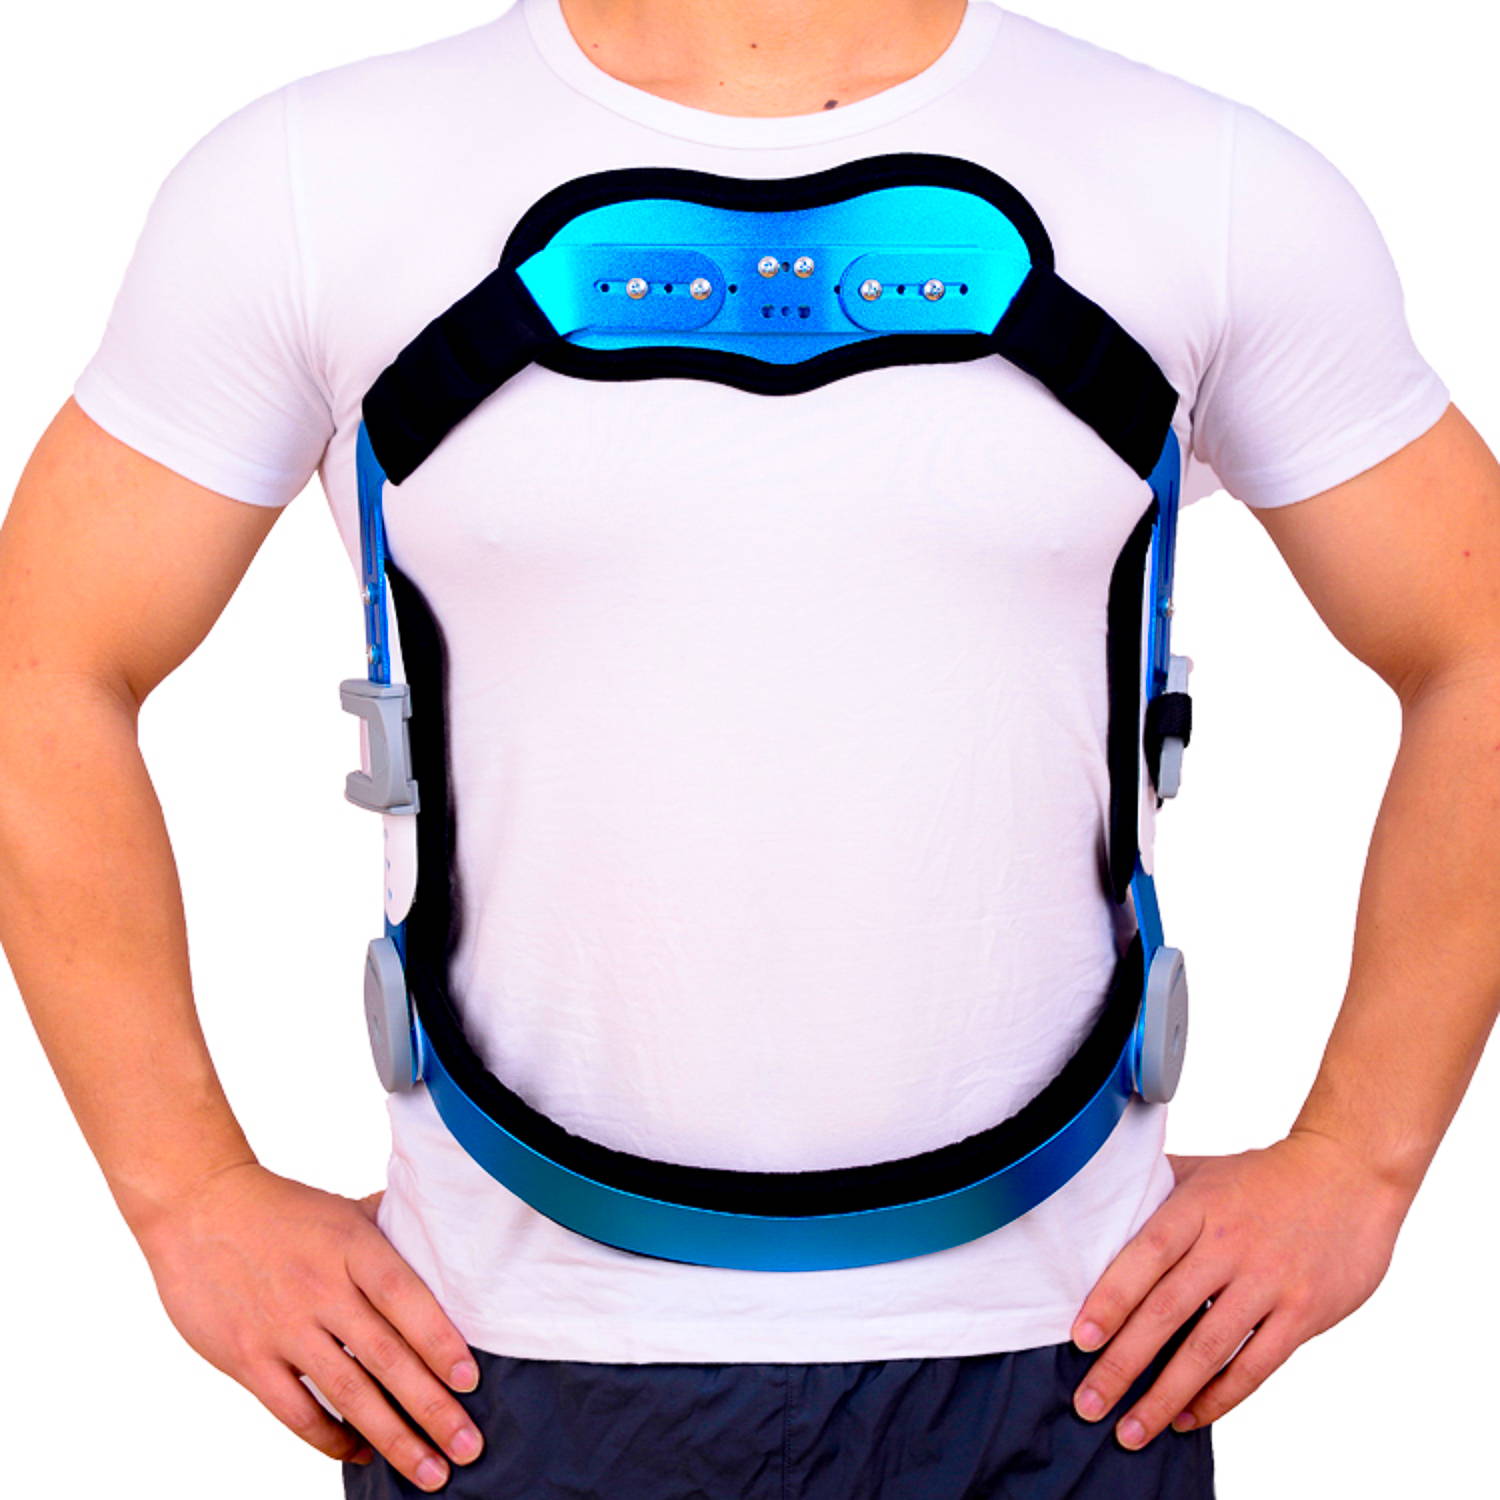 how Heated Decompression Back Belt & Portable Lumbar Traction Device with Heating Pad works to relieve pain and pressure off the back discs